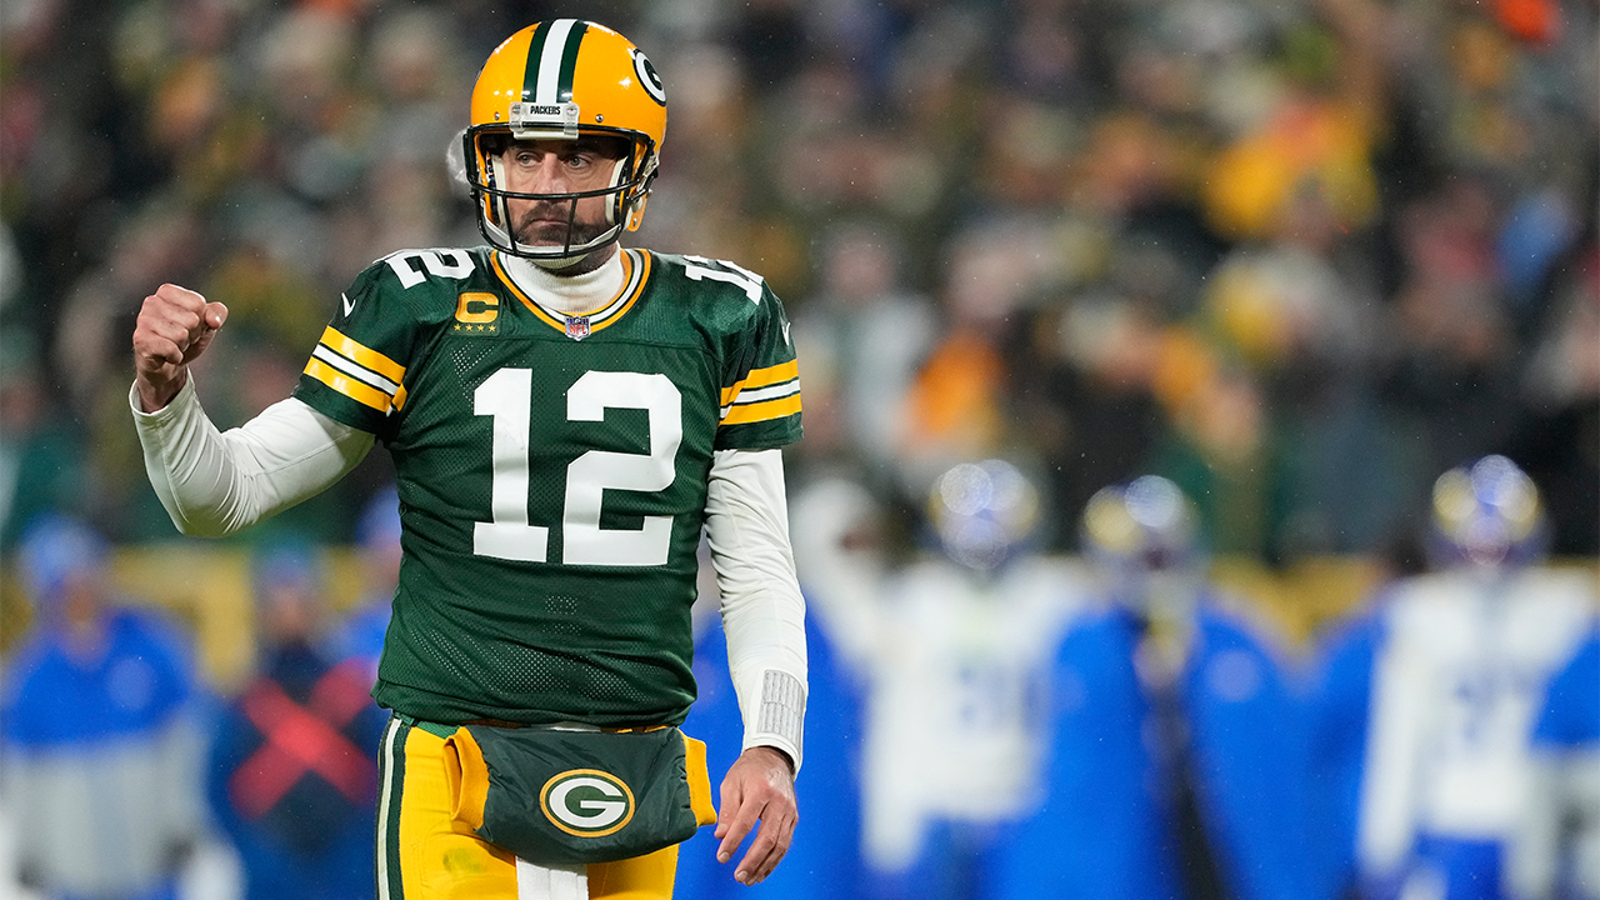 NFL Week 16: Will Aaron Rodgers and the Packers dump it on the Dolphins on Christmas Day?